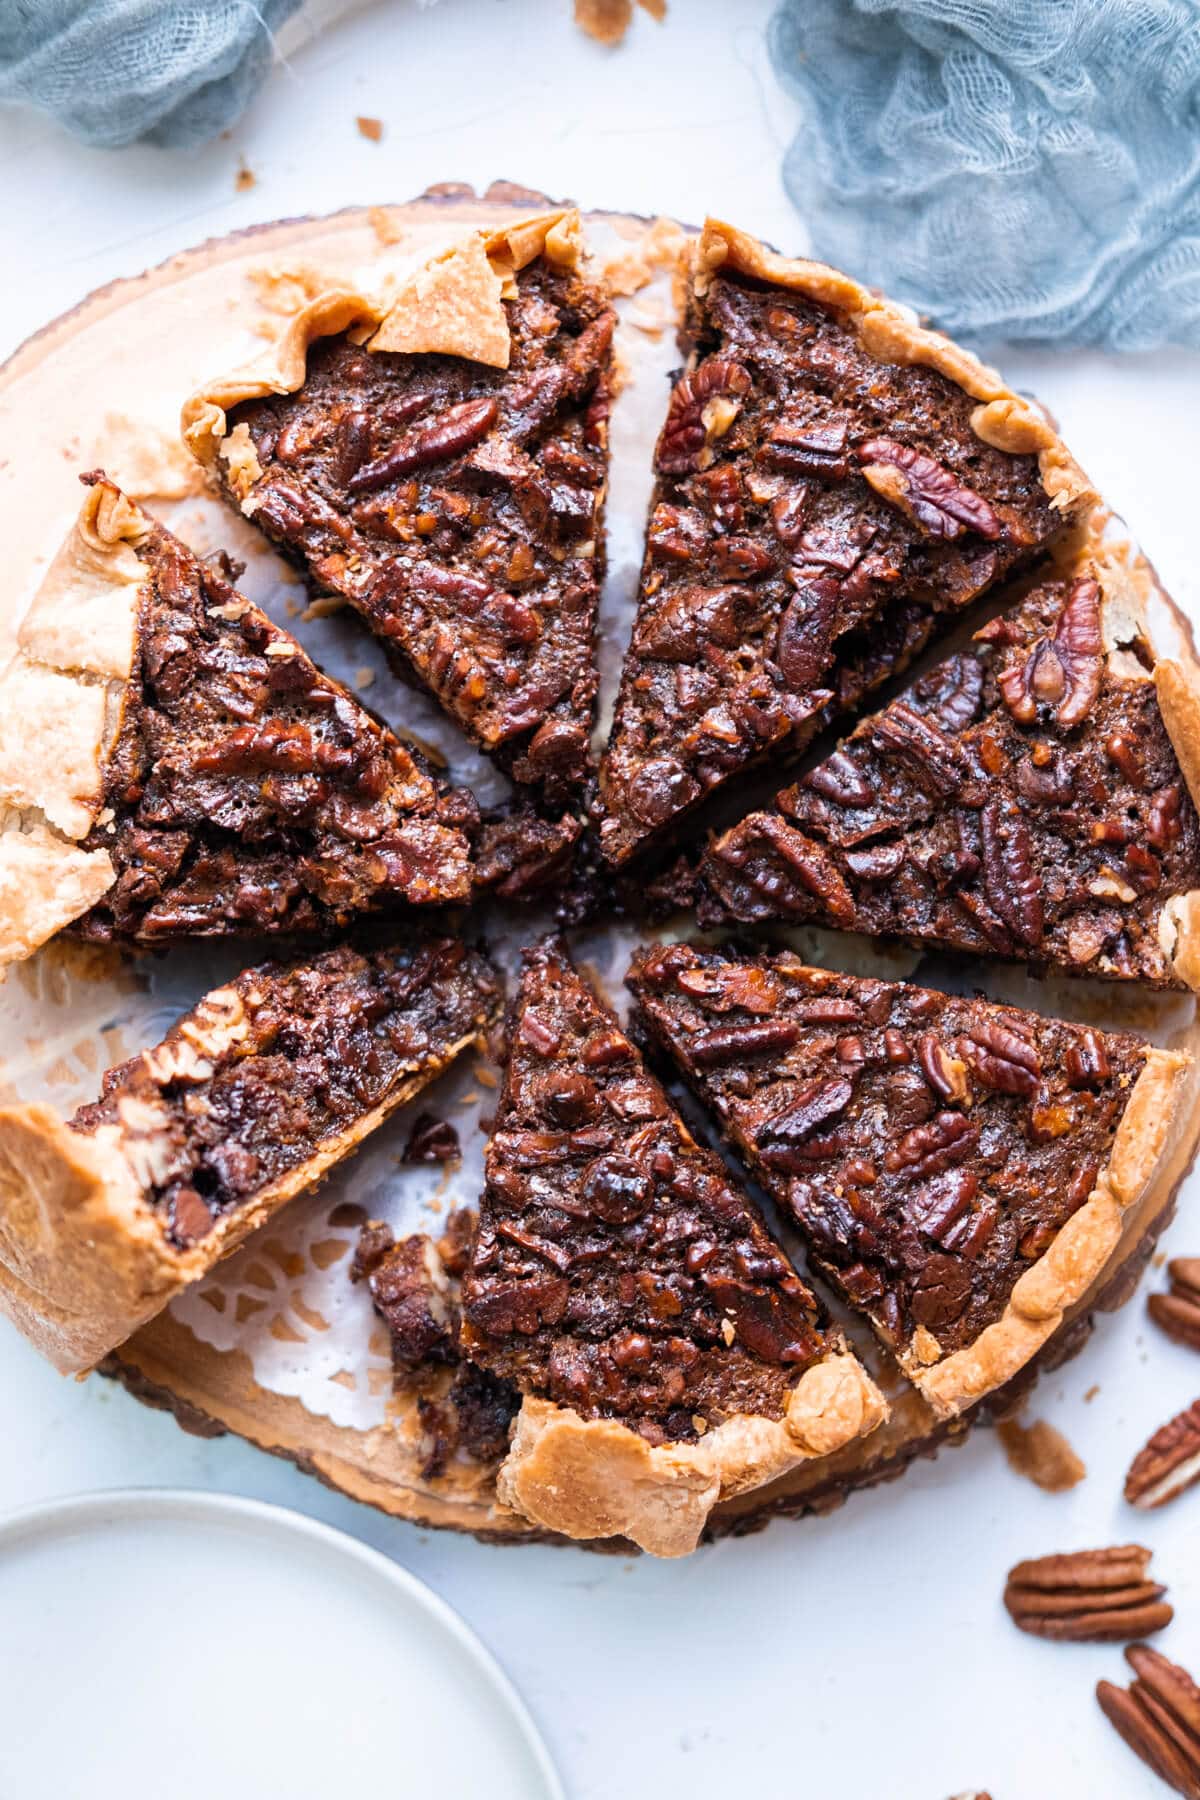 Chocolate pecan pie with crunchy pecans on the side.